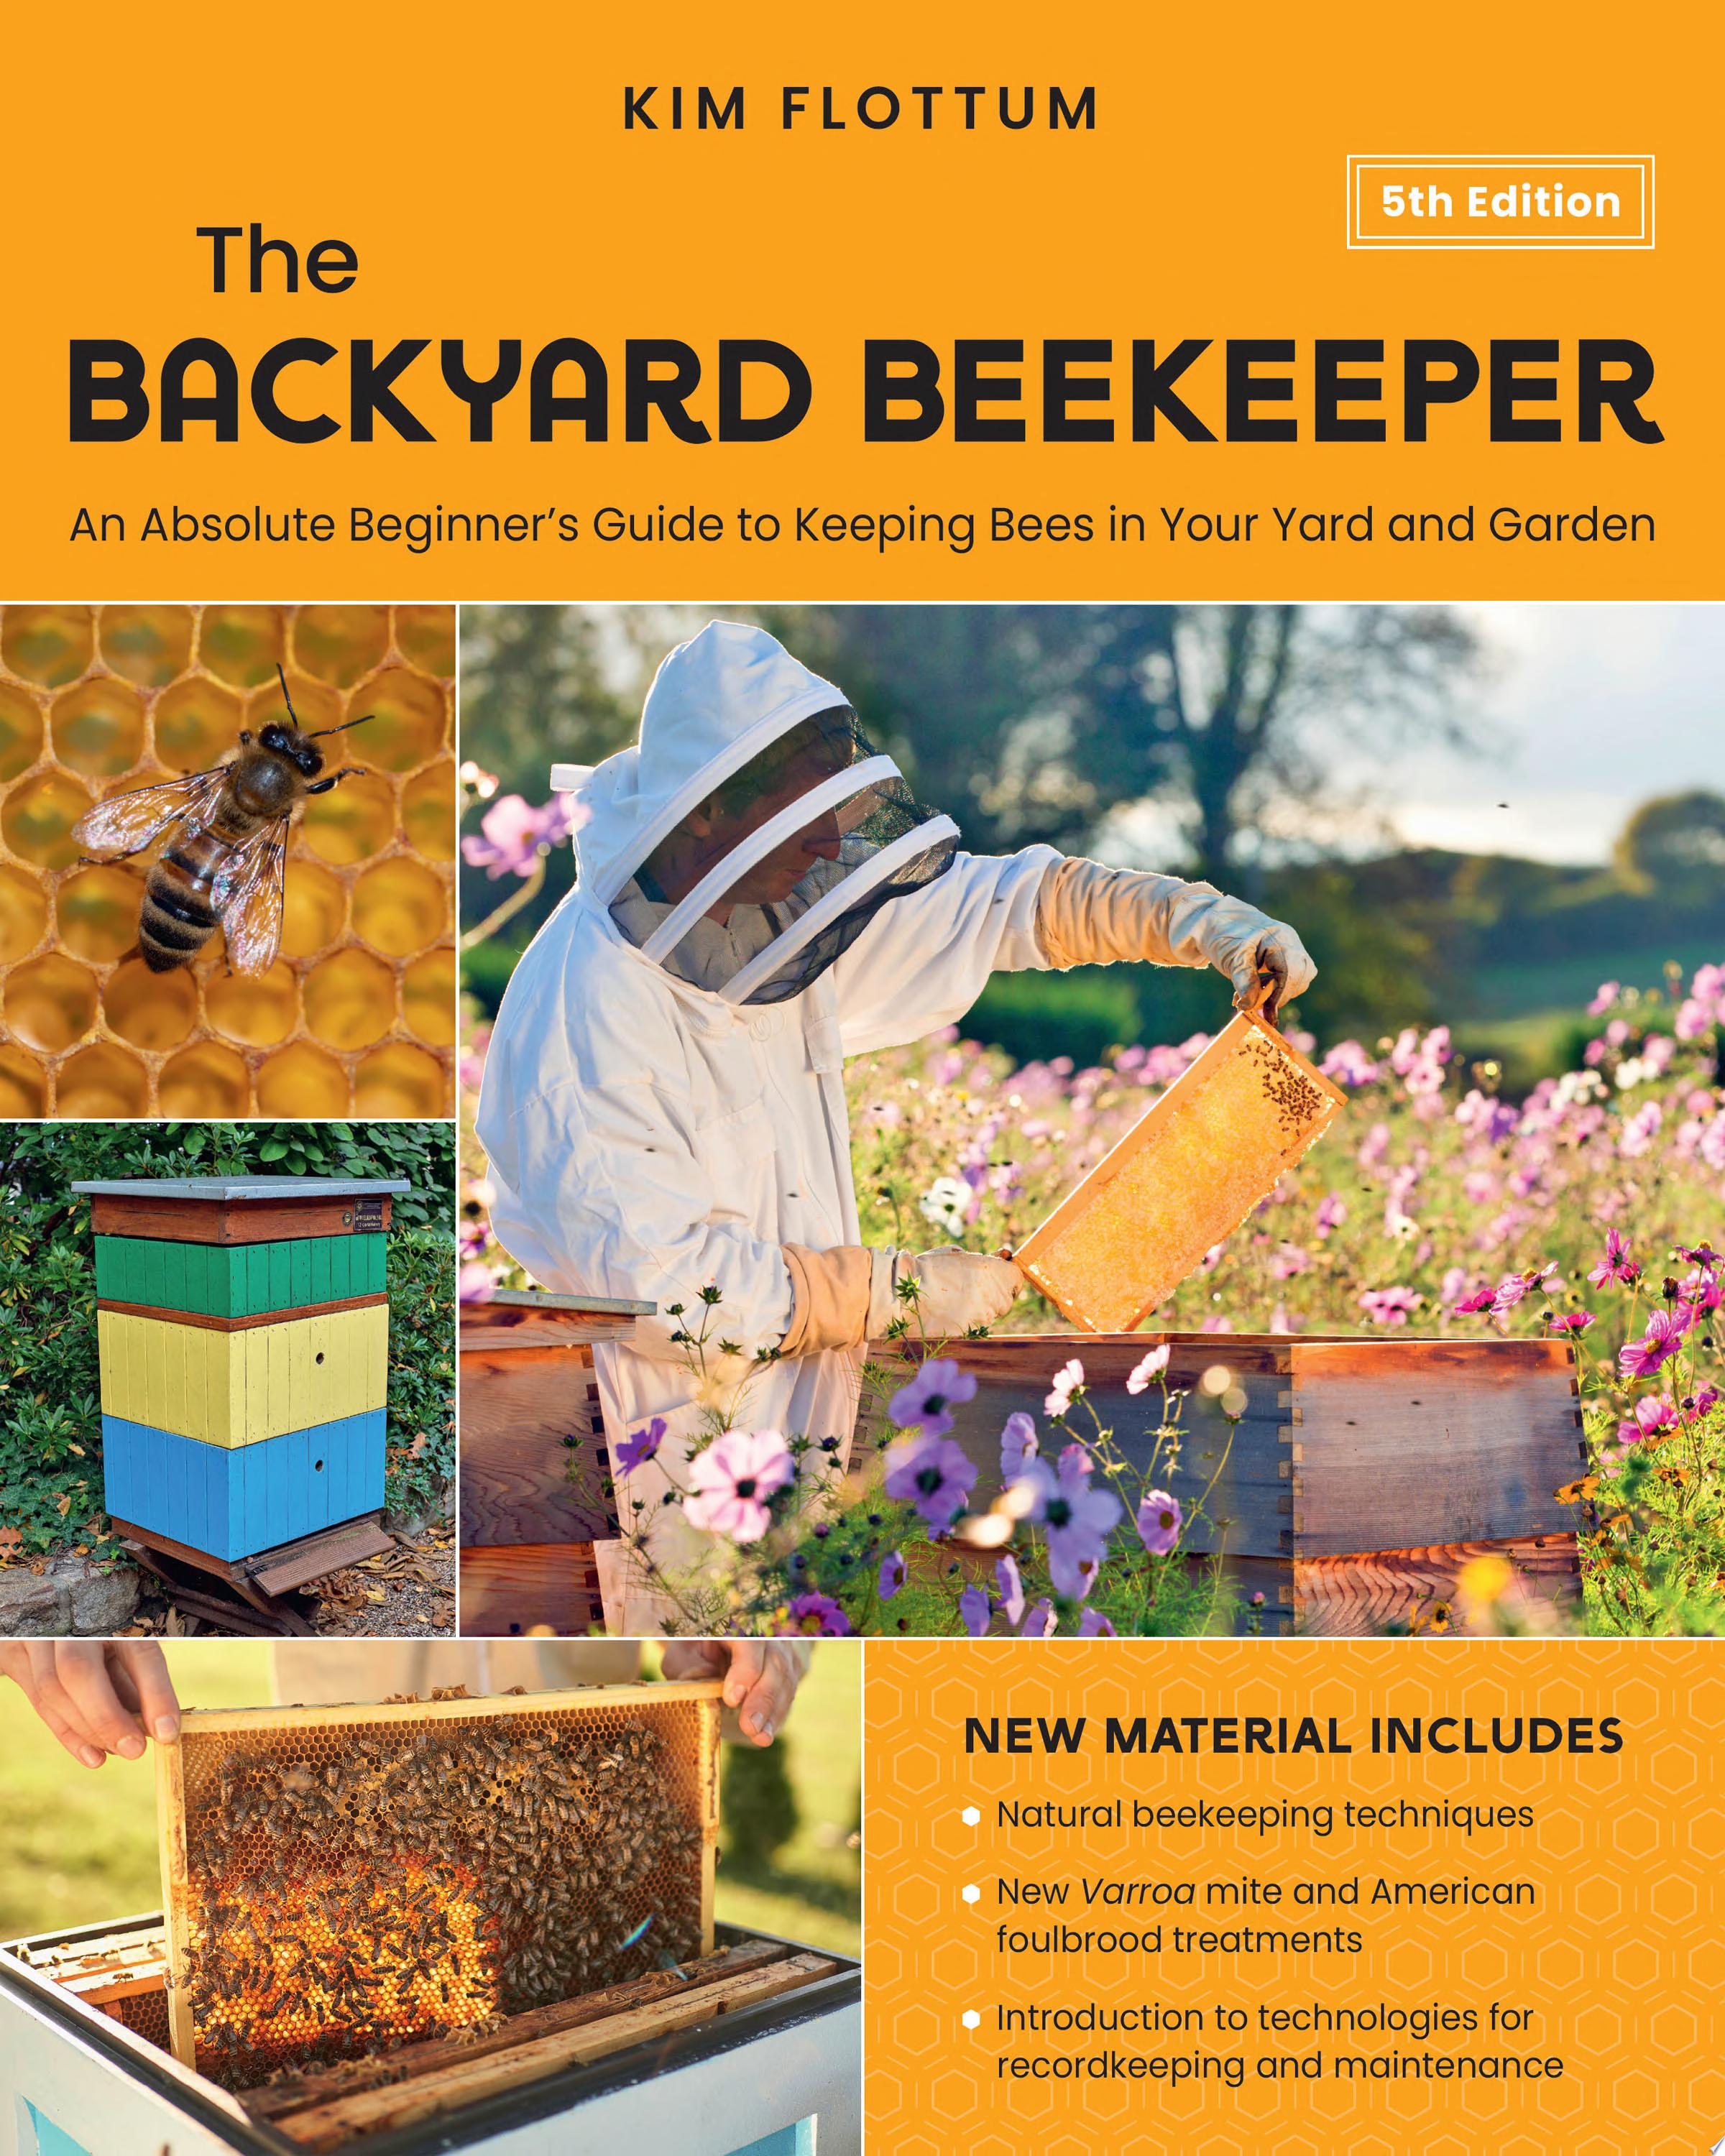 Image for "The Backyard Beekeeper, 5th Edition"